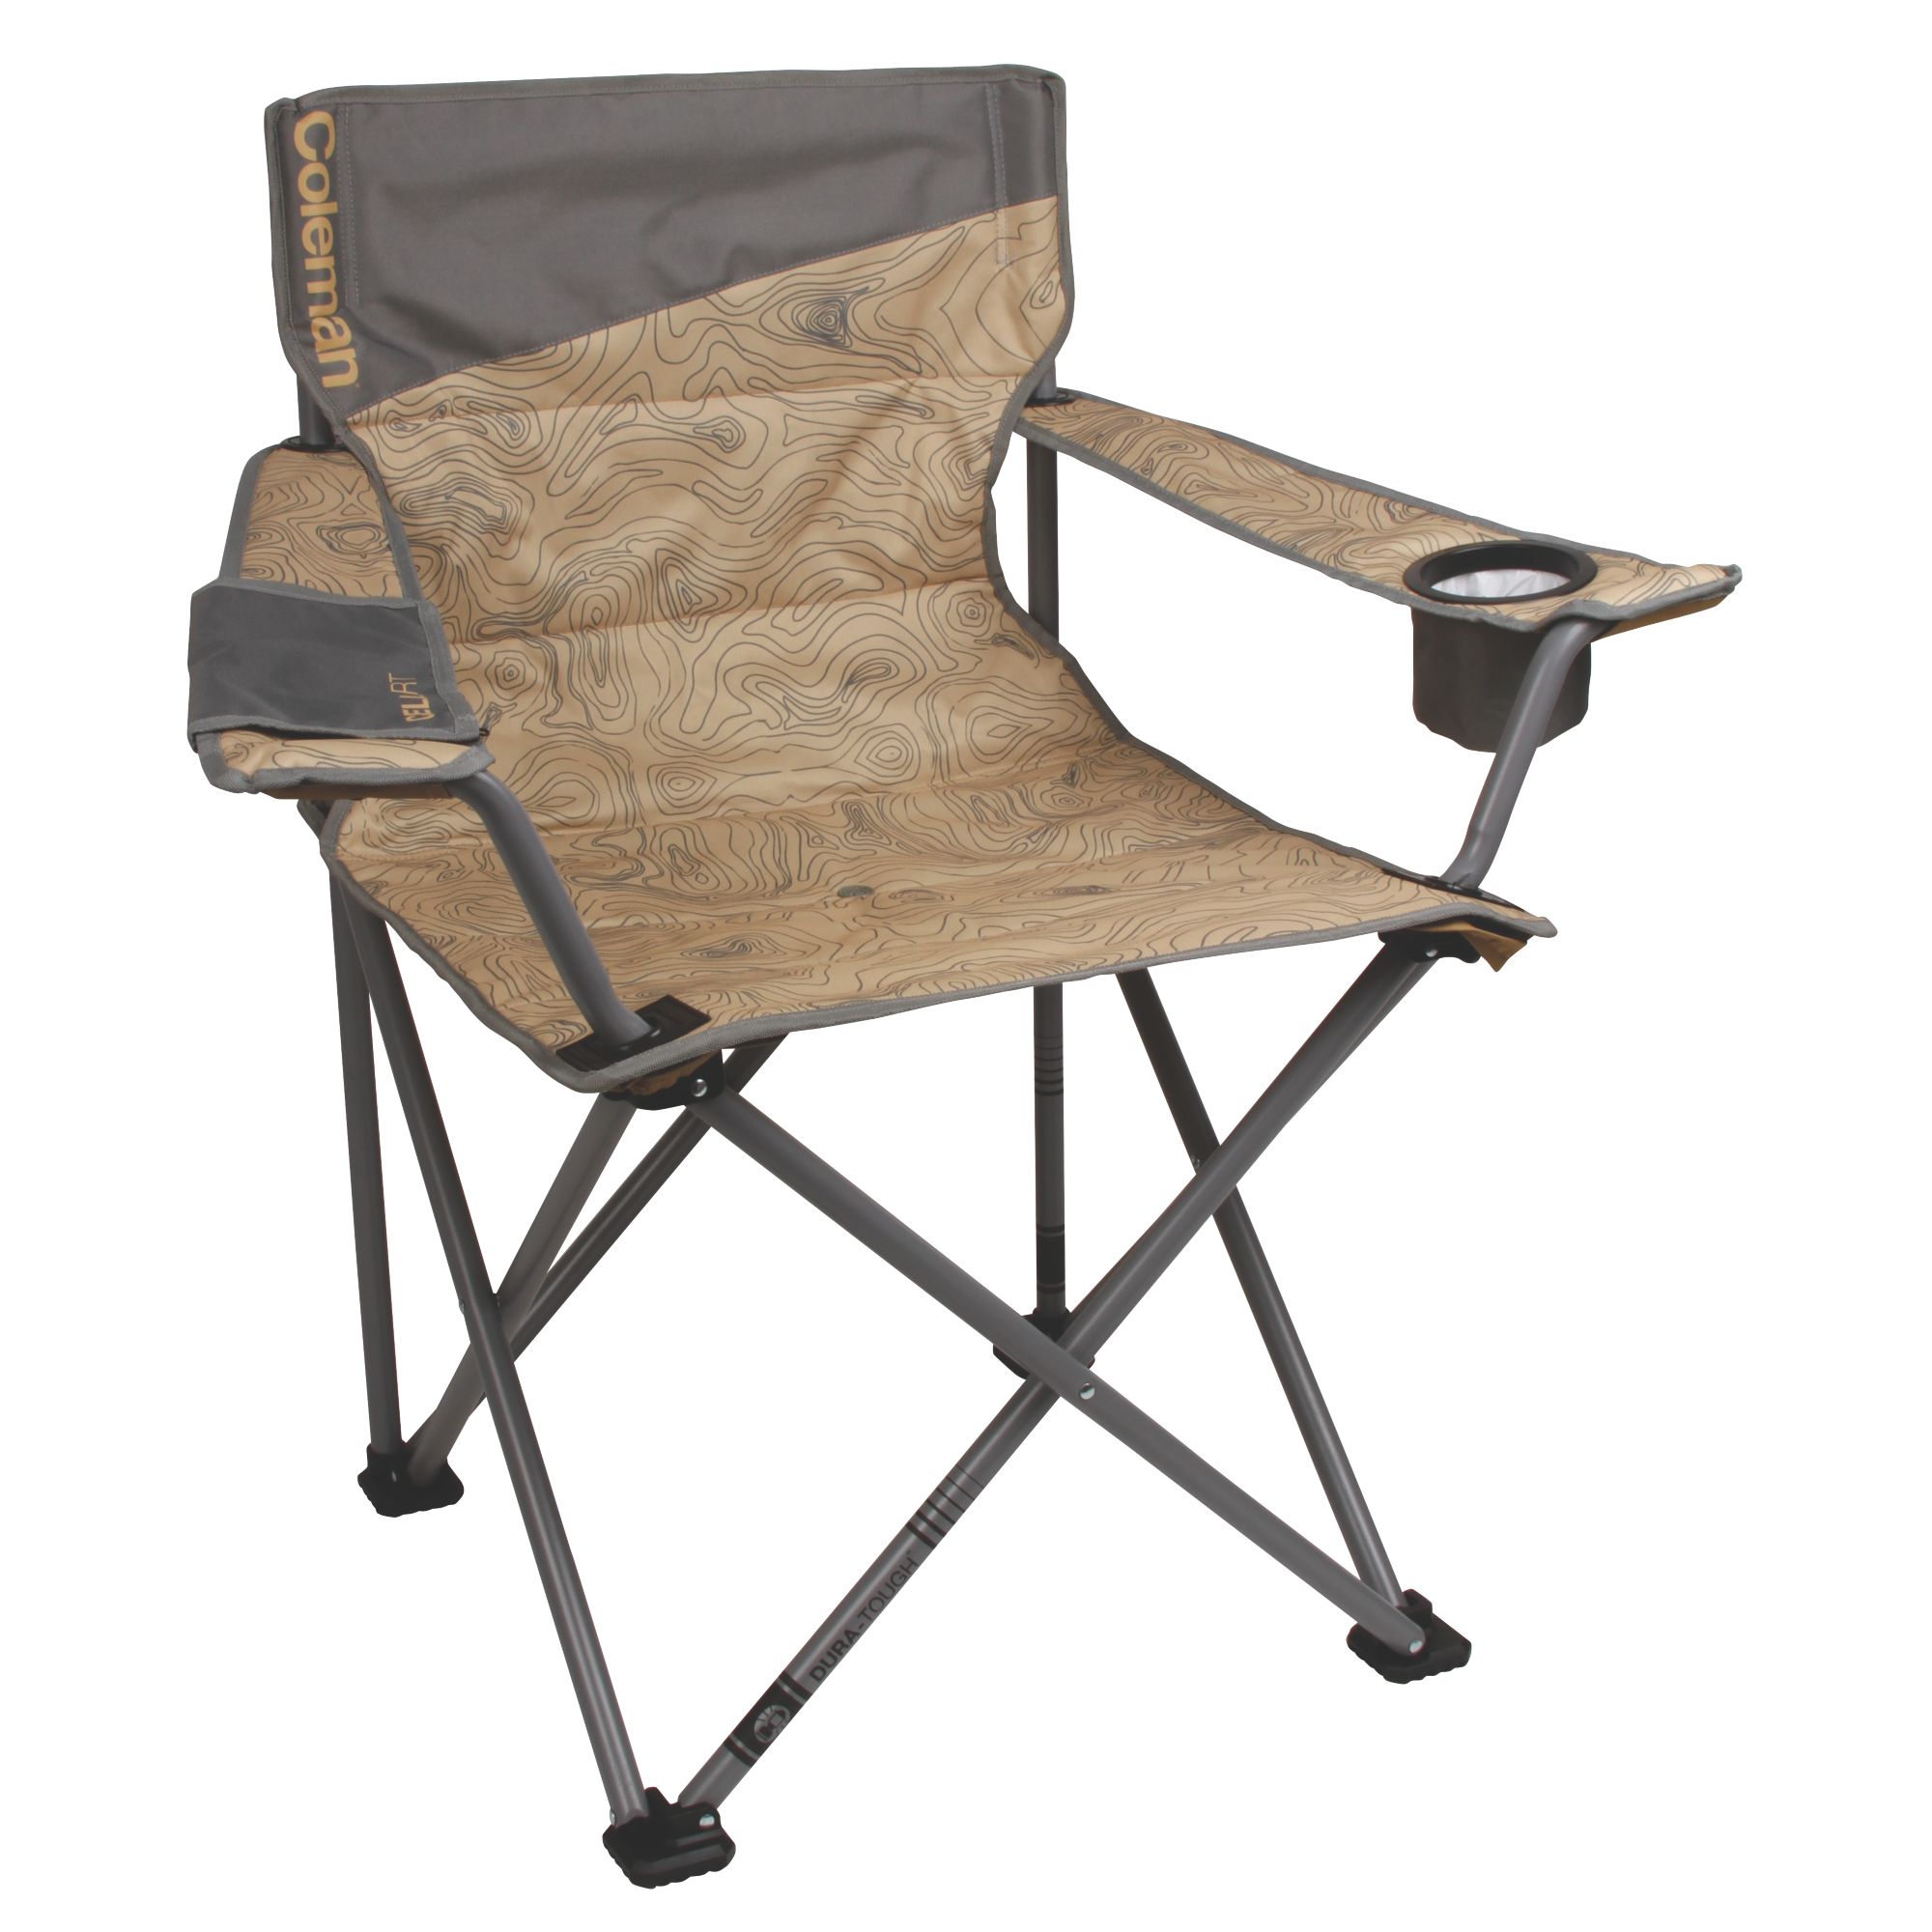 Coleman Big-N-Tall™ Quad Chair - image 1 of 7